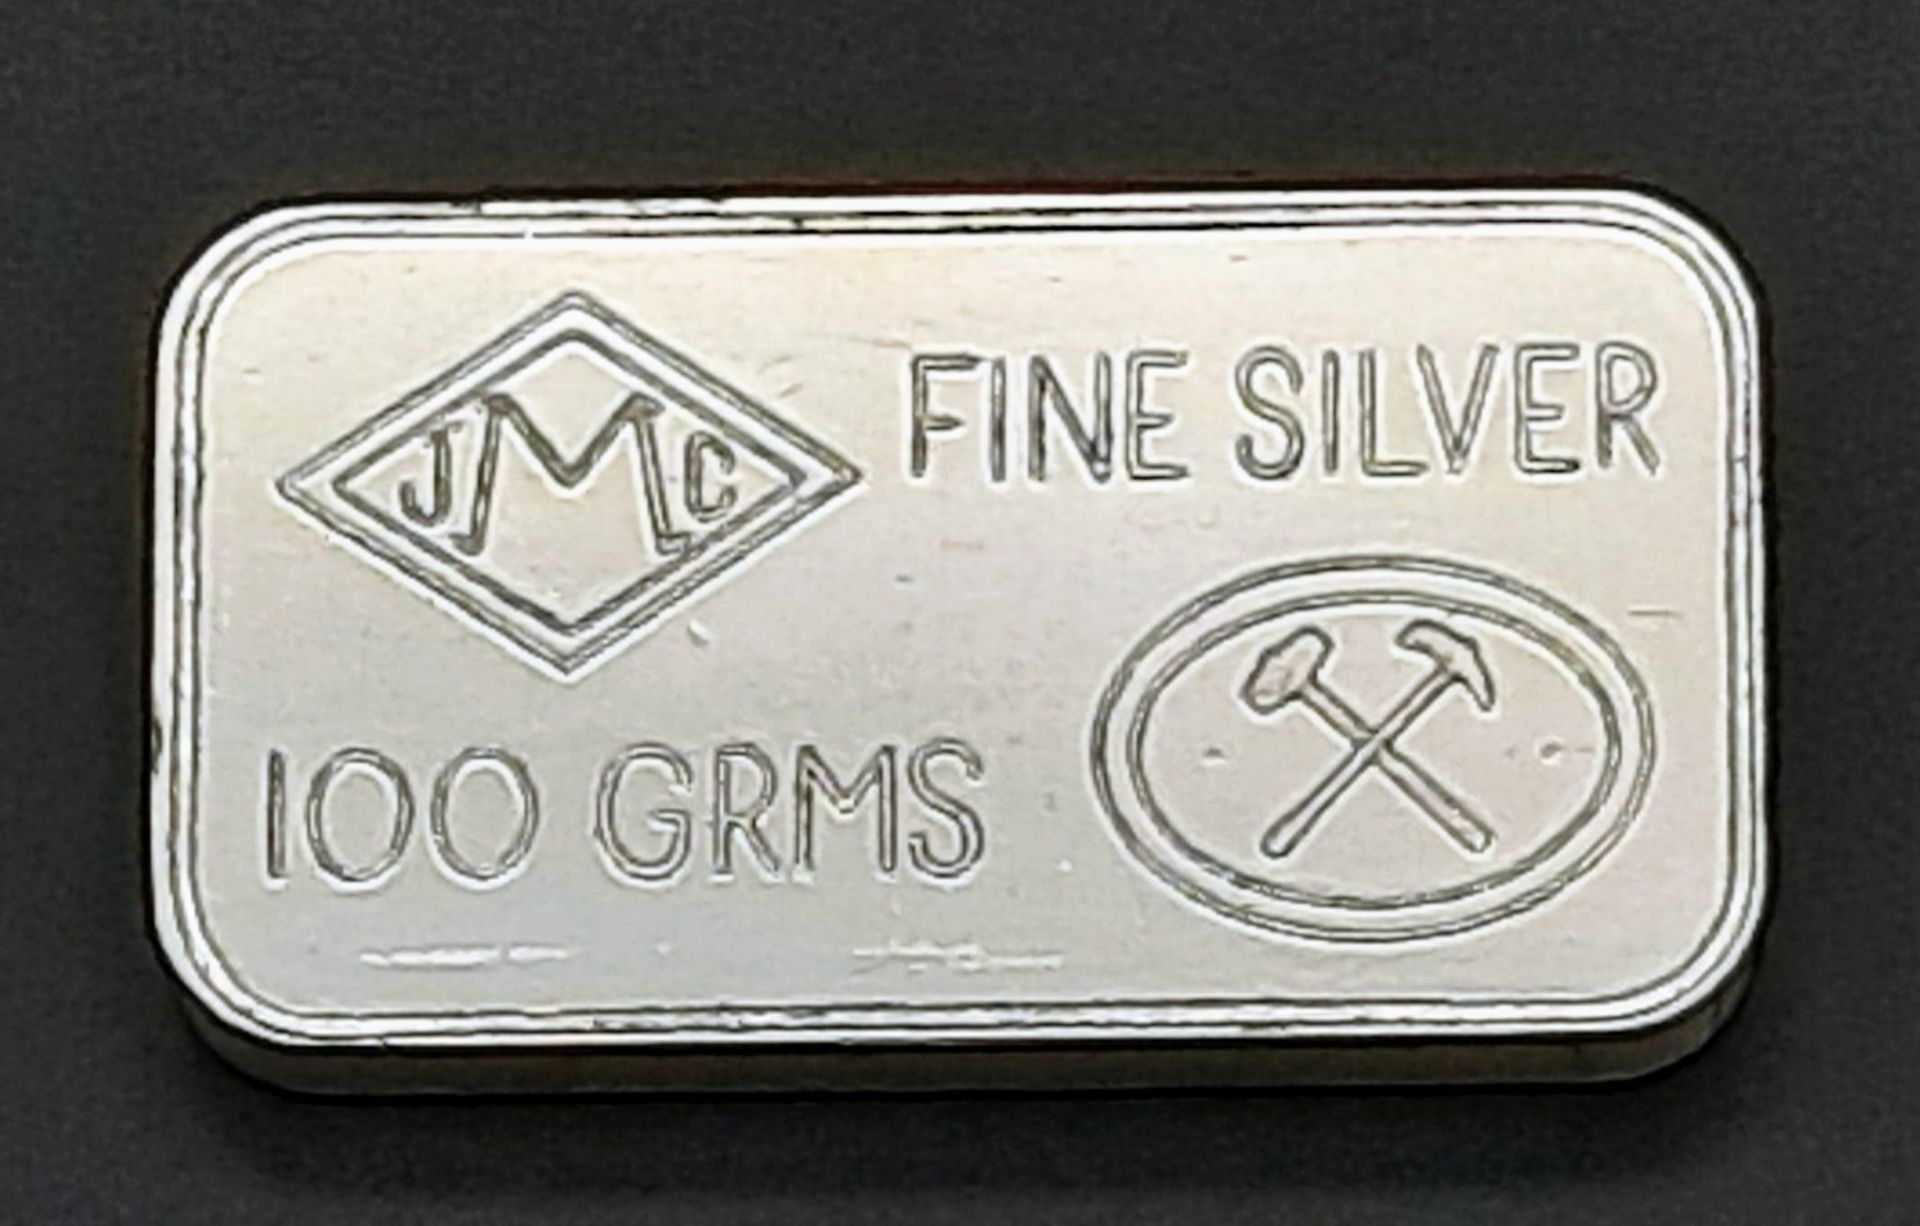 A Johnson Matthey of London Fine Silver (.999 purity) Bar. 100g in weight.